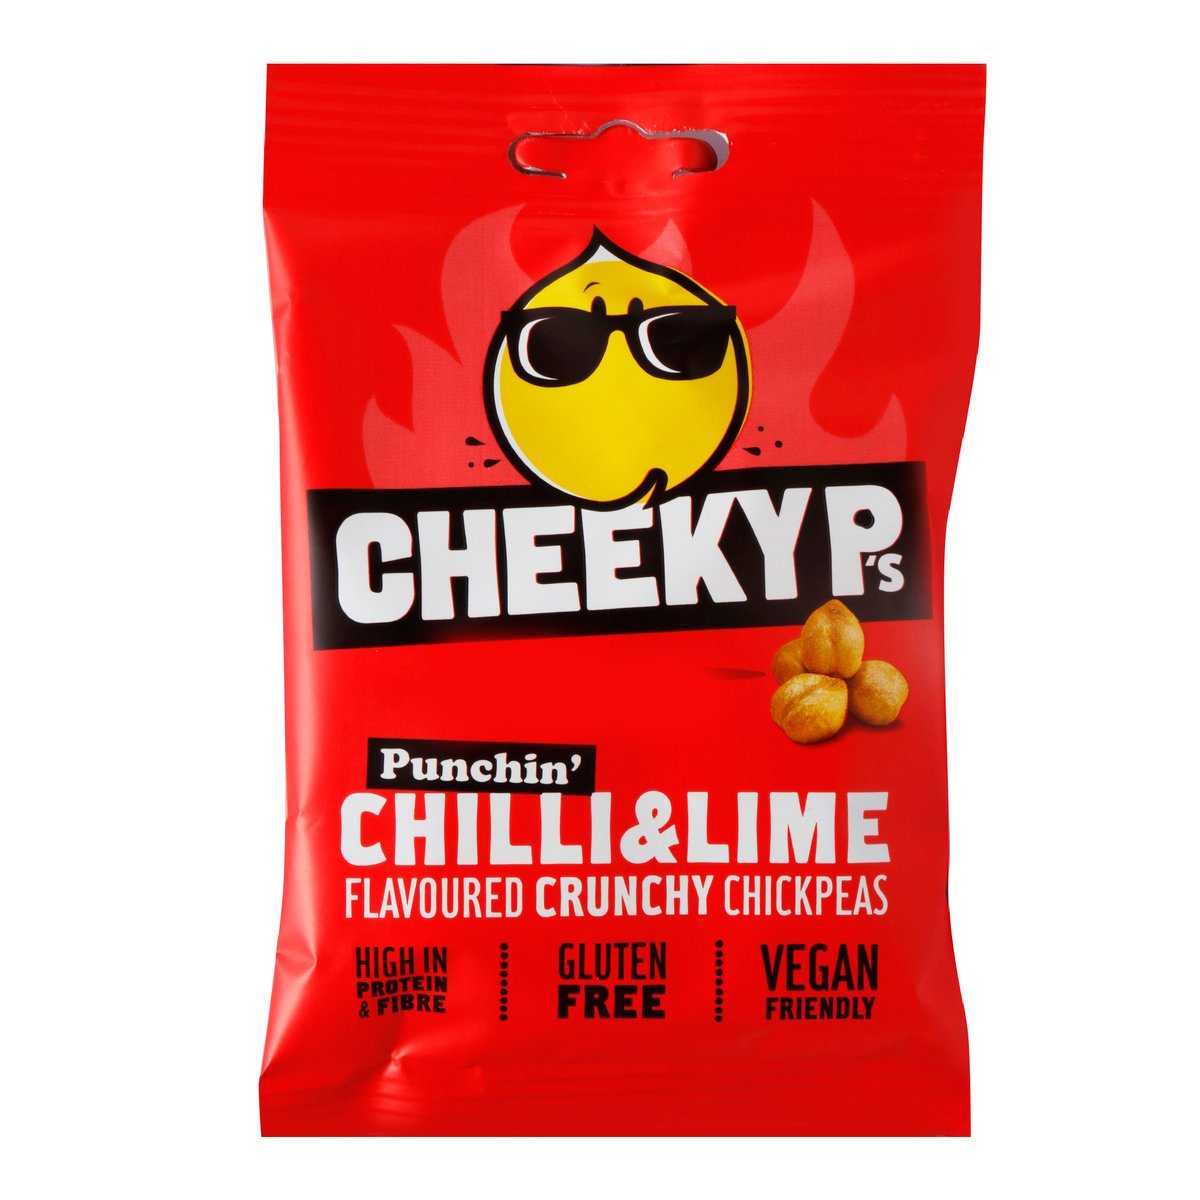 Cheeky P's Punchin' Chilli & Lime Crunchy Chickpeas 40g